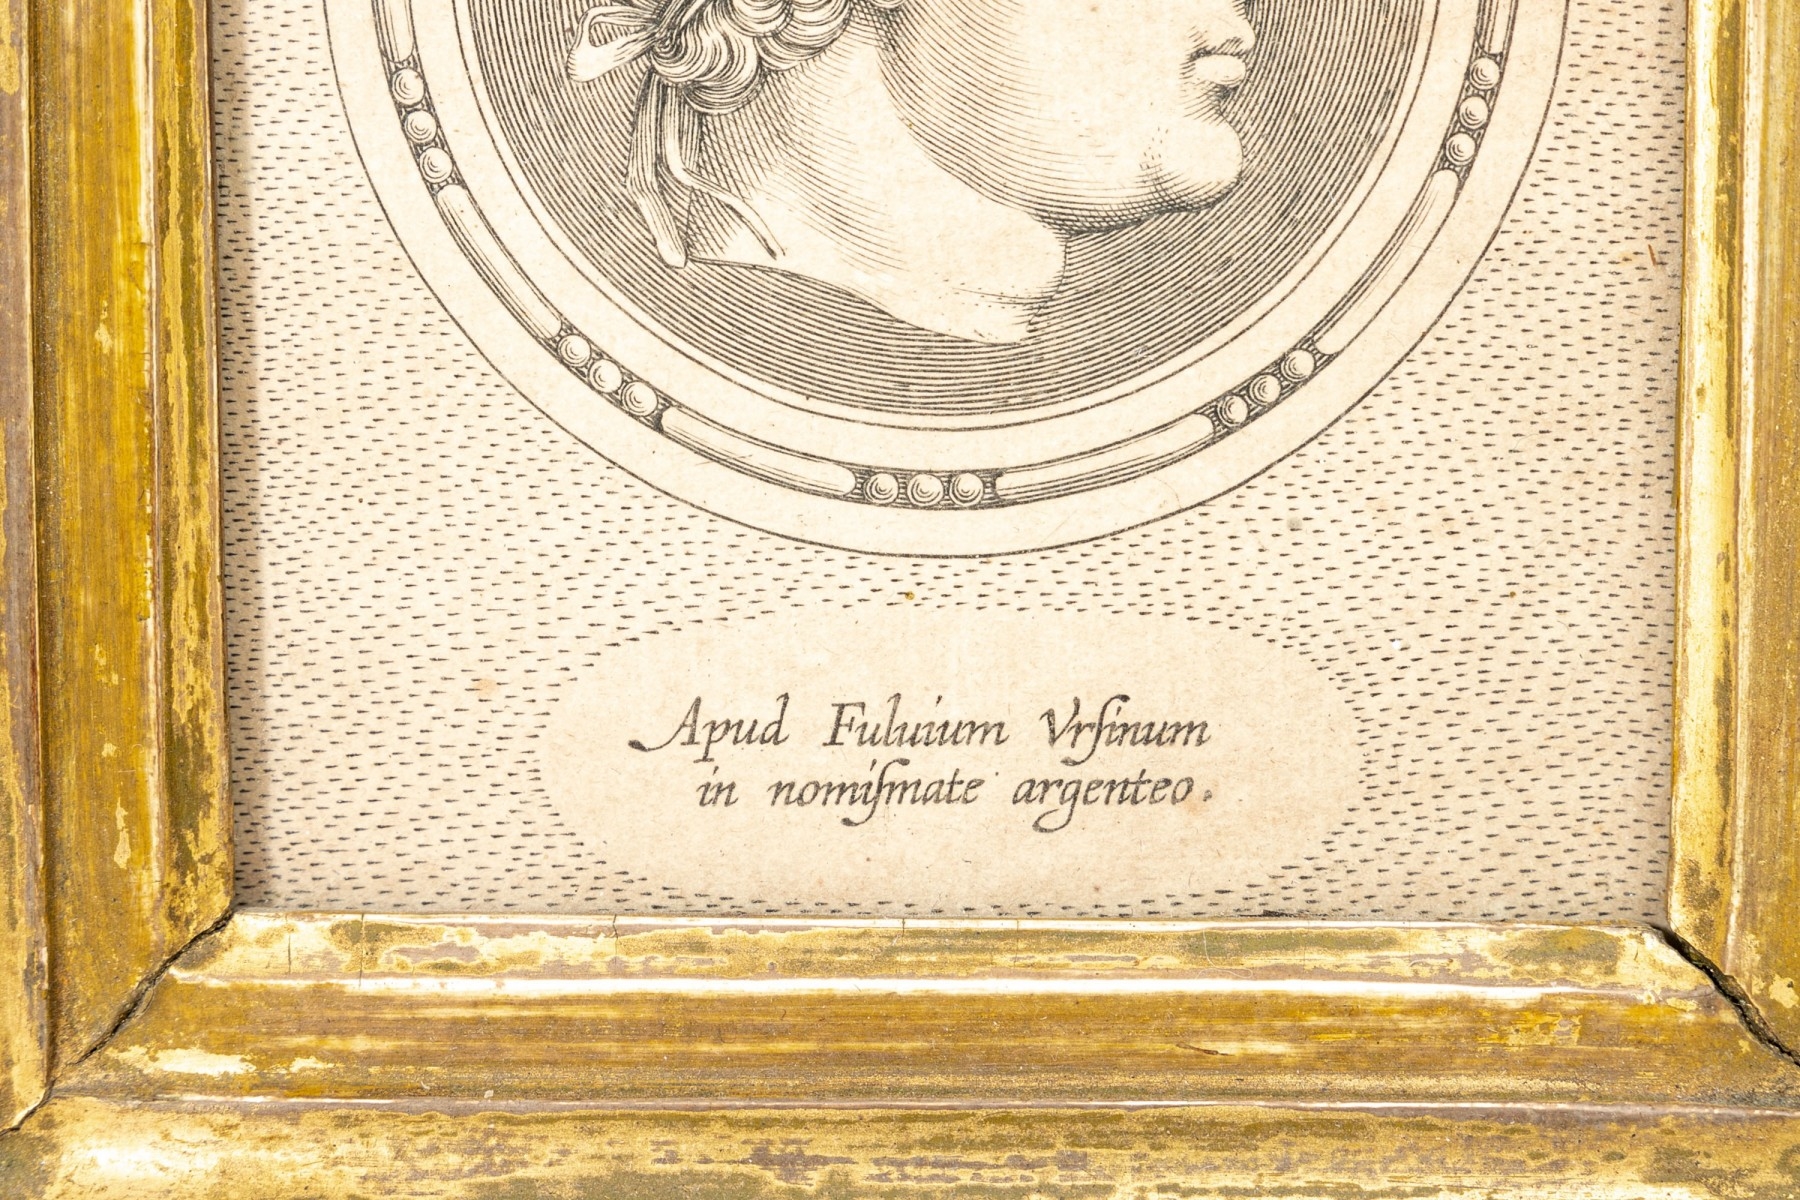 Artwork by Theodor Galle, Fulvio Orsini, Fulvius Coin, Made of engraving